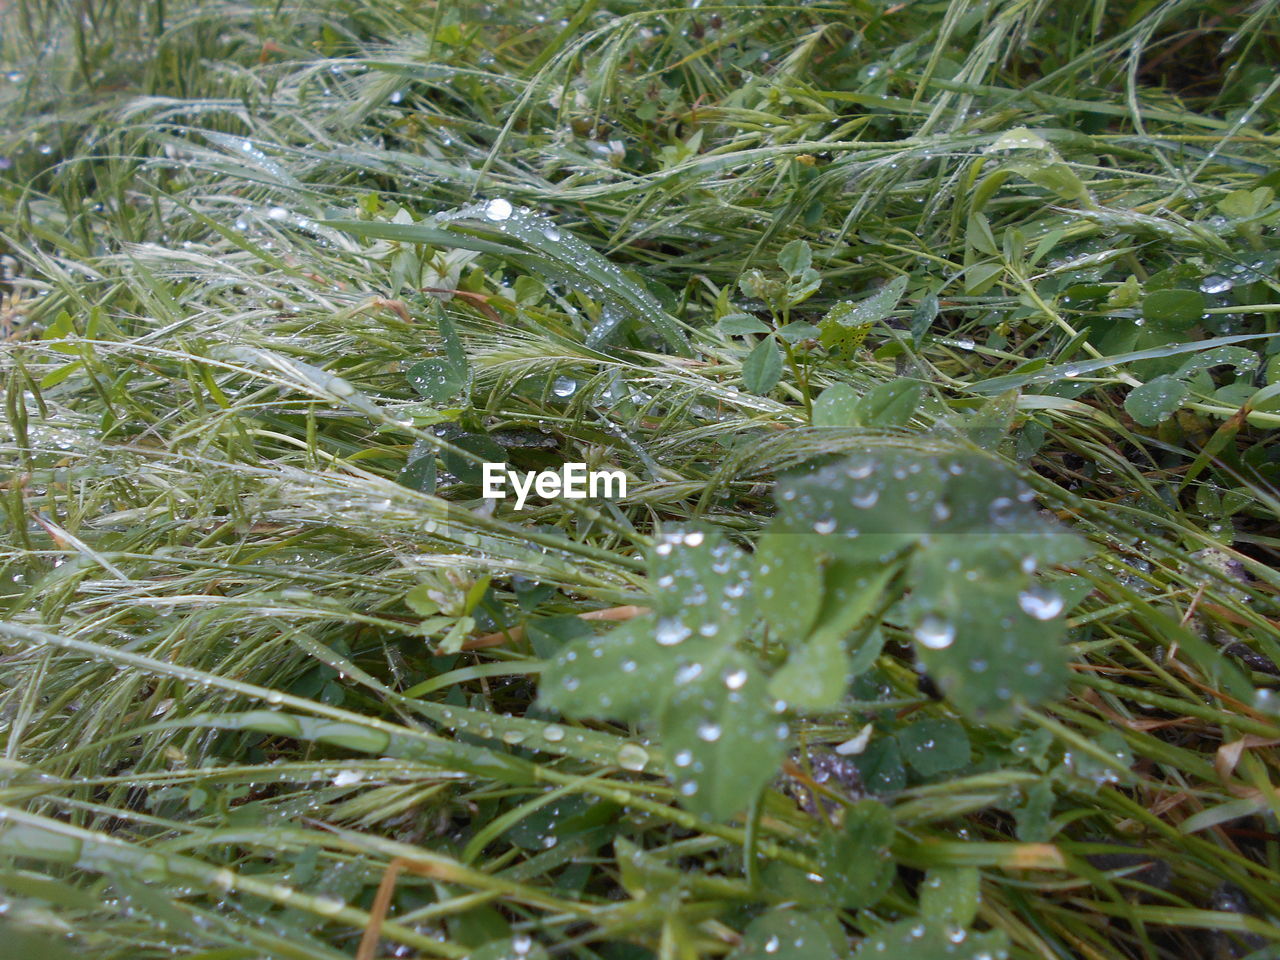 CLOSE-UP OF RAINDROPS ON GRASS WITH DEW DROPS